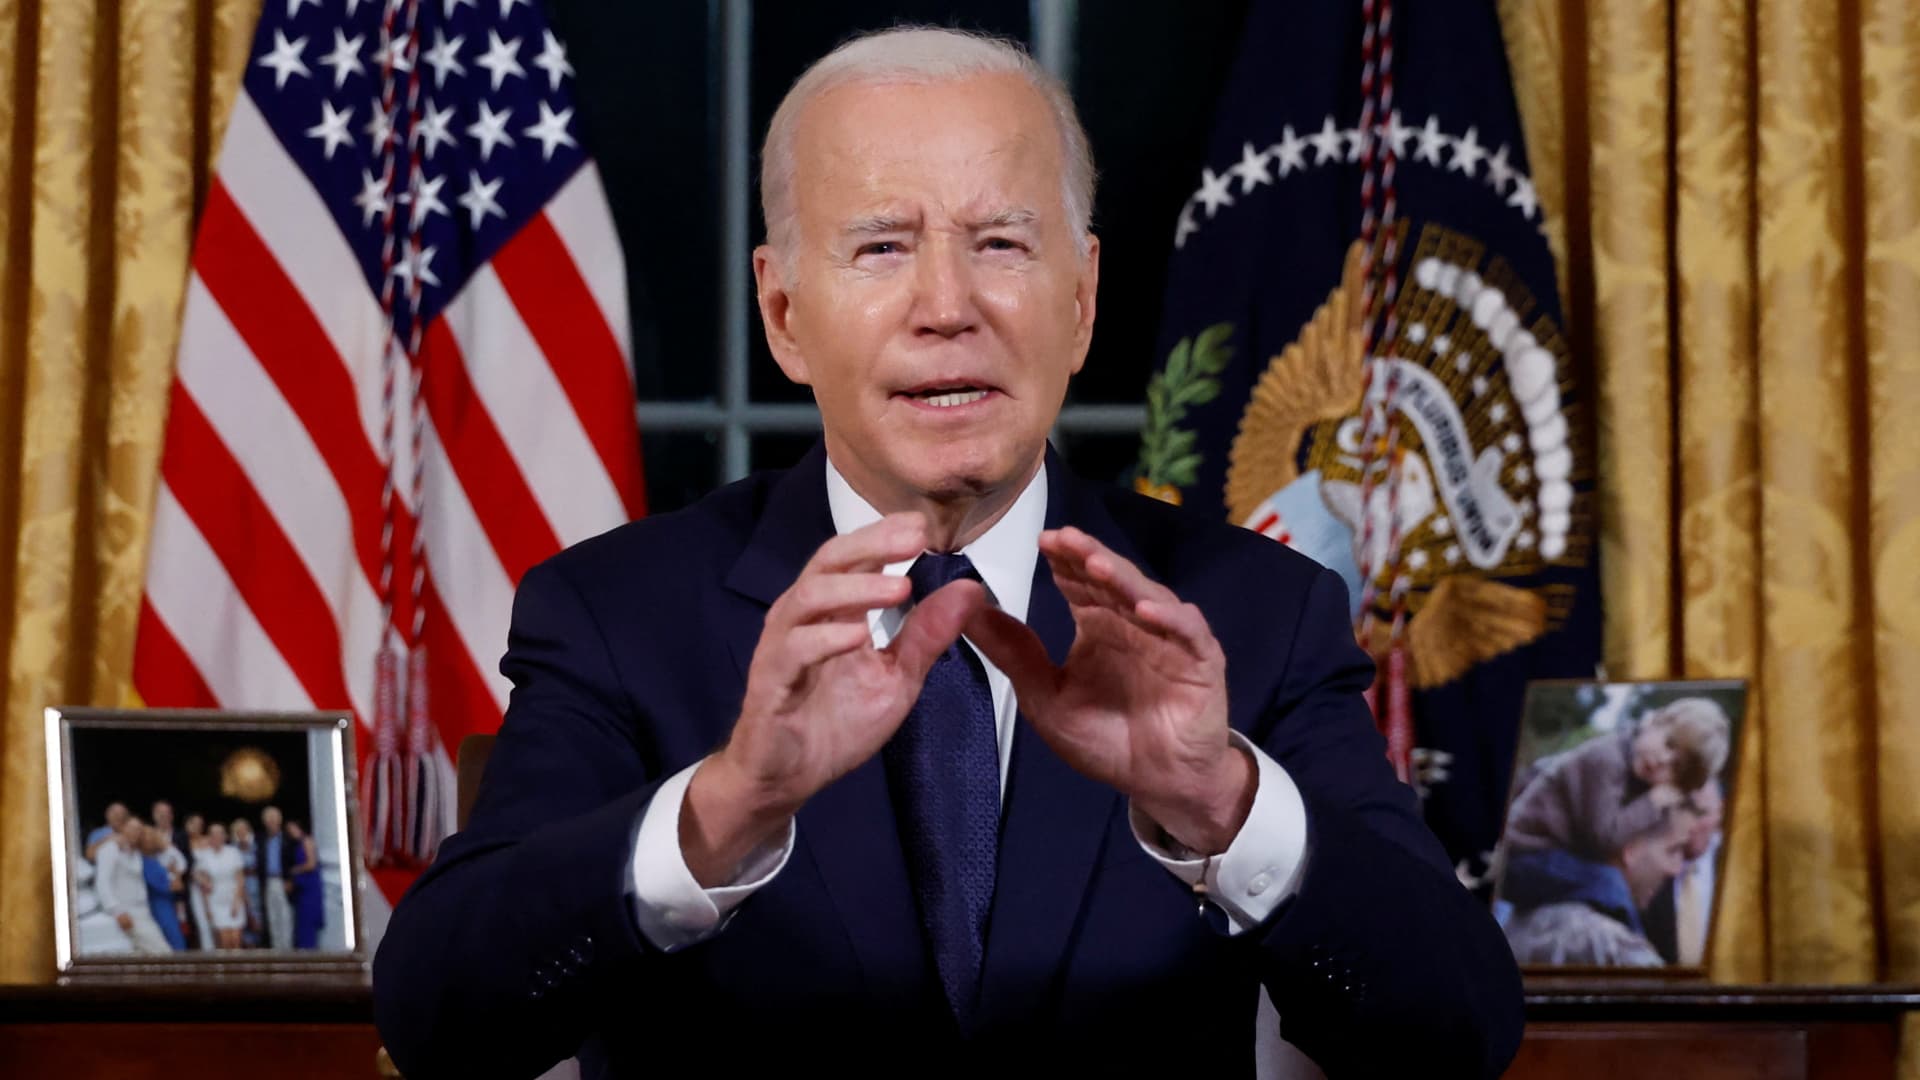 U.S. President Joe Biden delivers a prime-time address to the nation about his approaches to the conflict between Israel and Hamas, humanitarian assistance in Gaza and continued support for Ukraine in their war with Russia, from the Oval Office of the White House in Washington on Oct. 19, 2023.